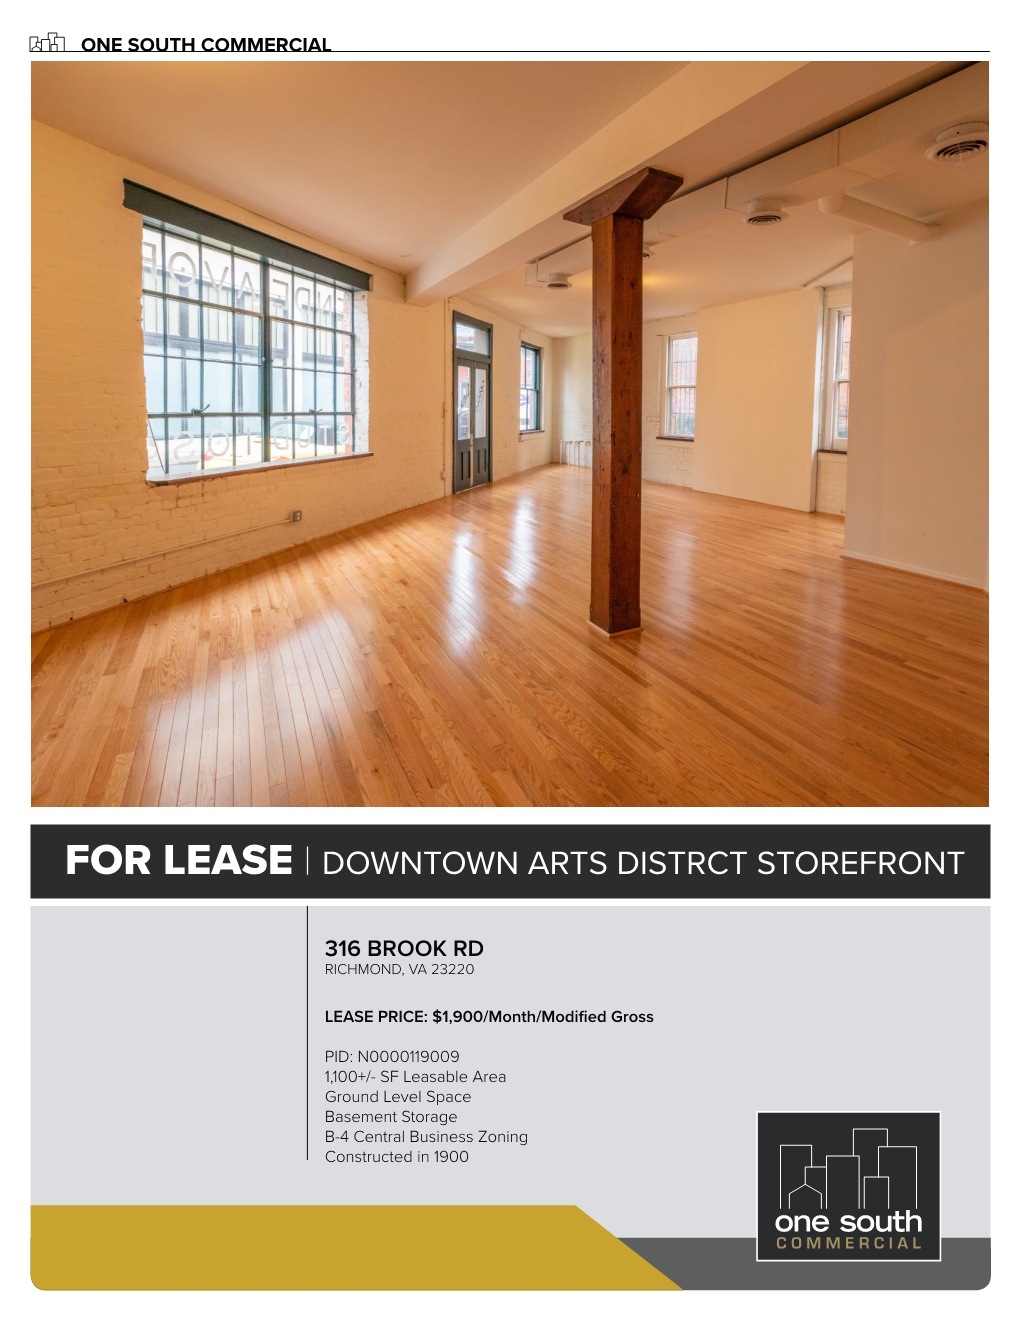 For Lease | Downtown Arts Distrct Storefront